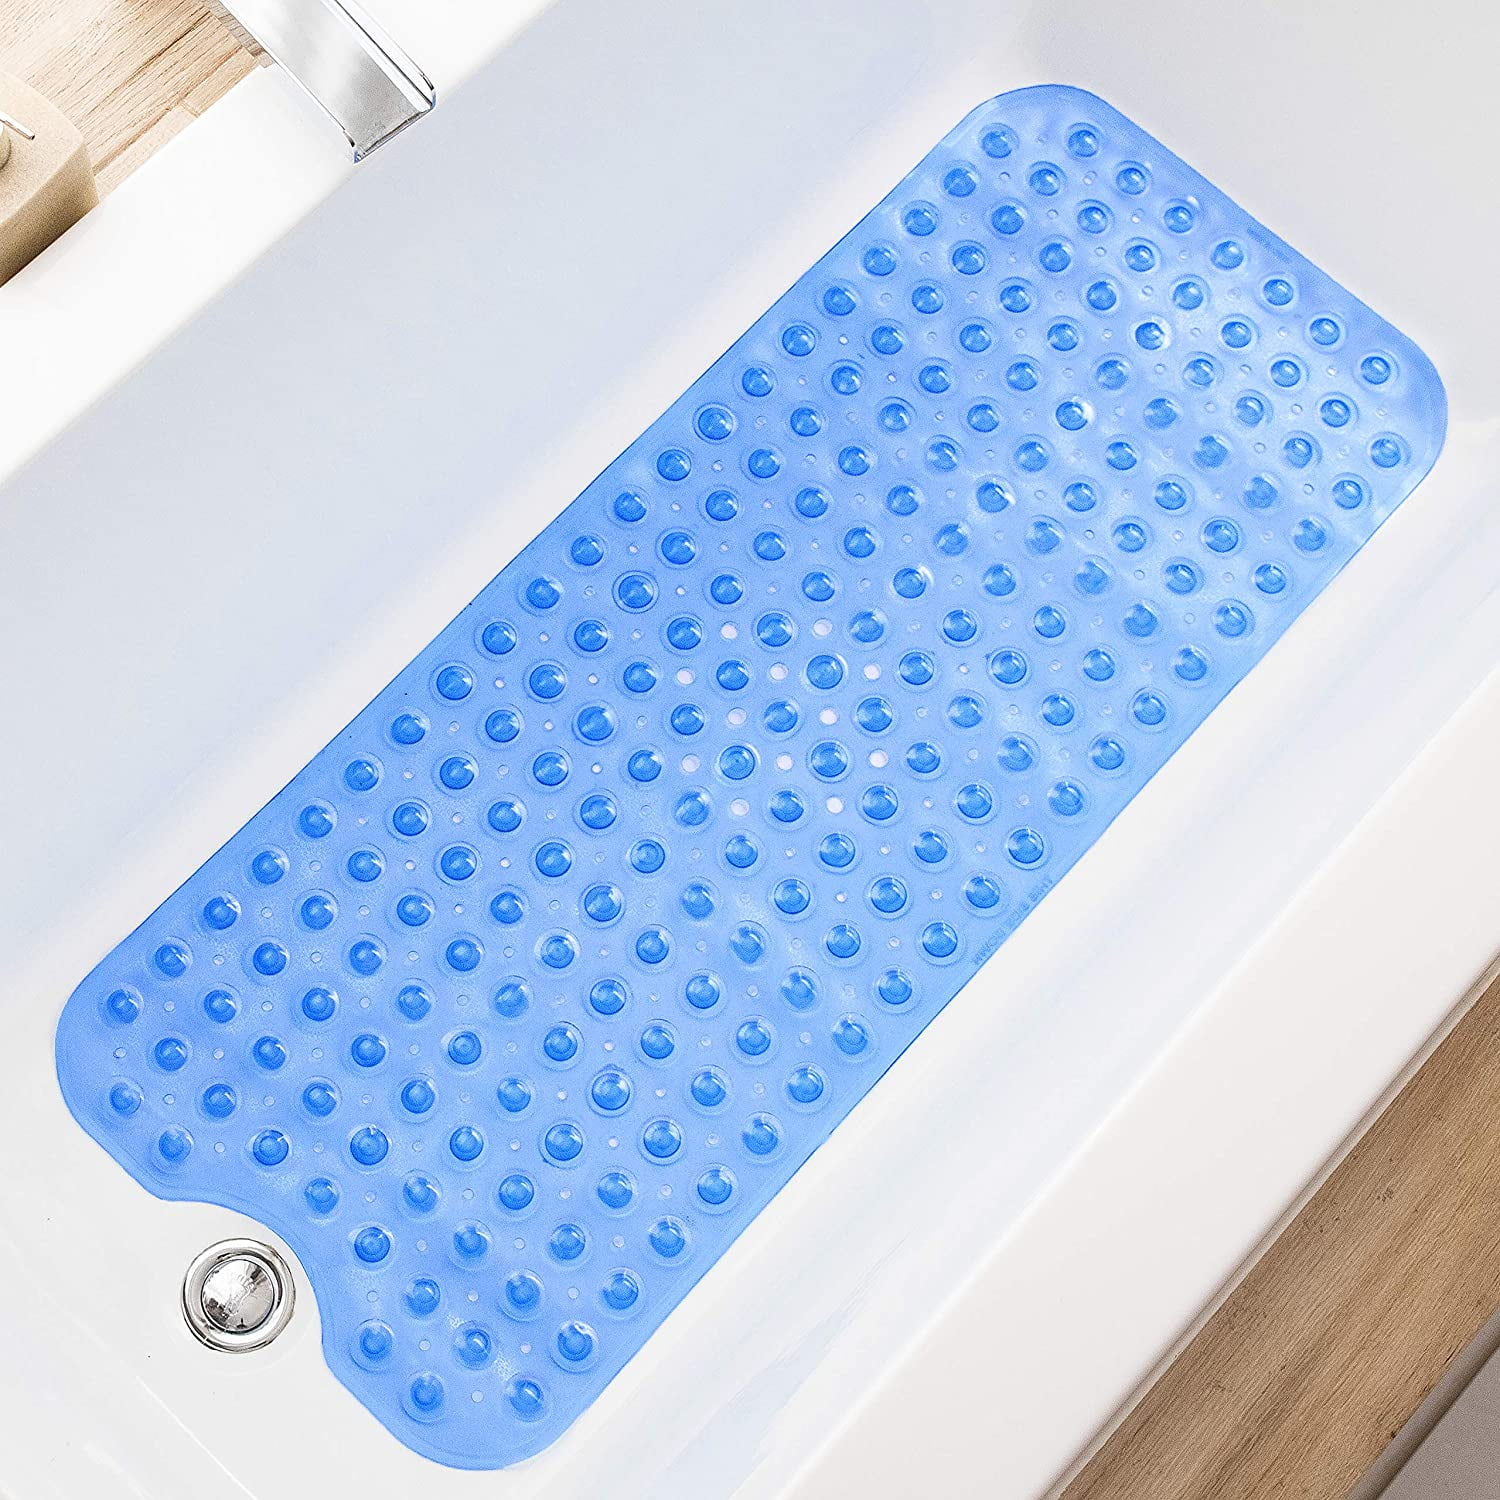 Zimtown Bath Tub Clear Bath Mat Non Slip Safety Anti Skid Shower Protection  Extra Long 